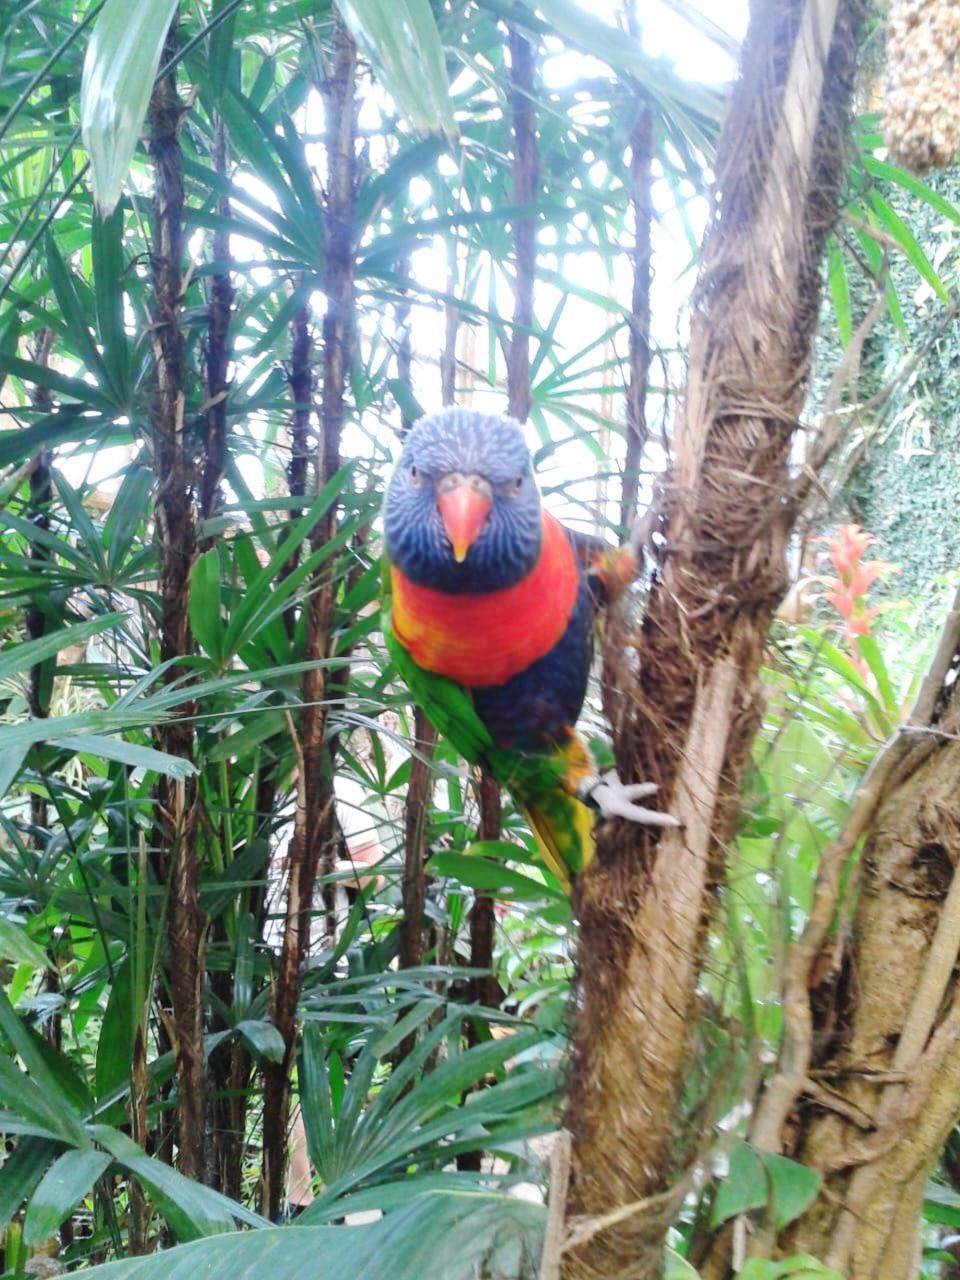 tree, plant, parrot, animal wildlife, animal themes, animal, jungle, bird, nature, wildlife, growth, branch, day, rainforest, one animal, perching, rainbow lorikeet, tree trunk, trunk, no people, green, beauty in nature, outdoors, land, low angle view, pet, leaf, plant part, forest